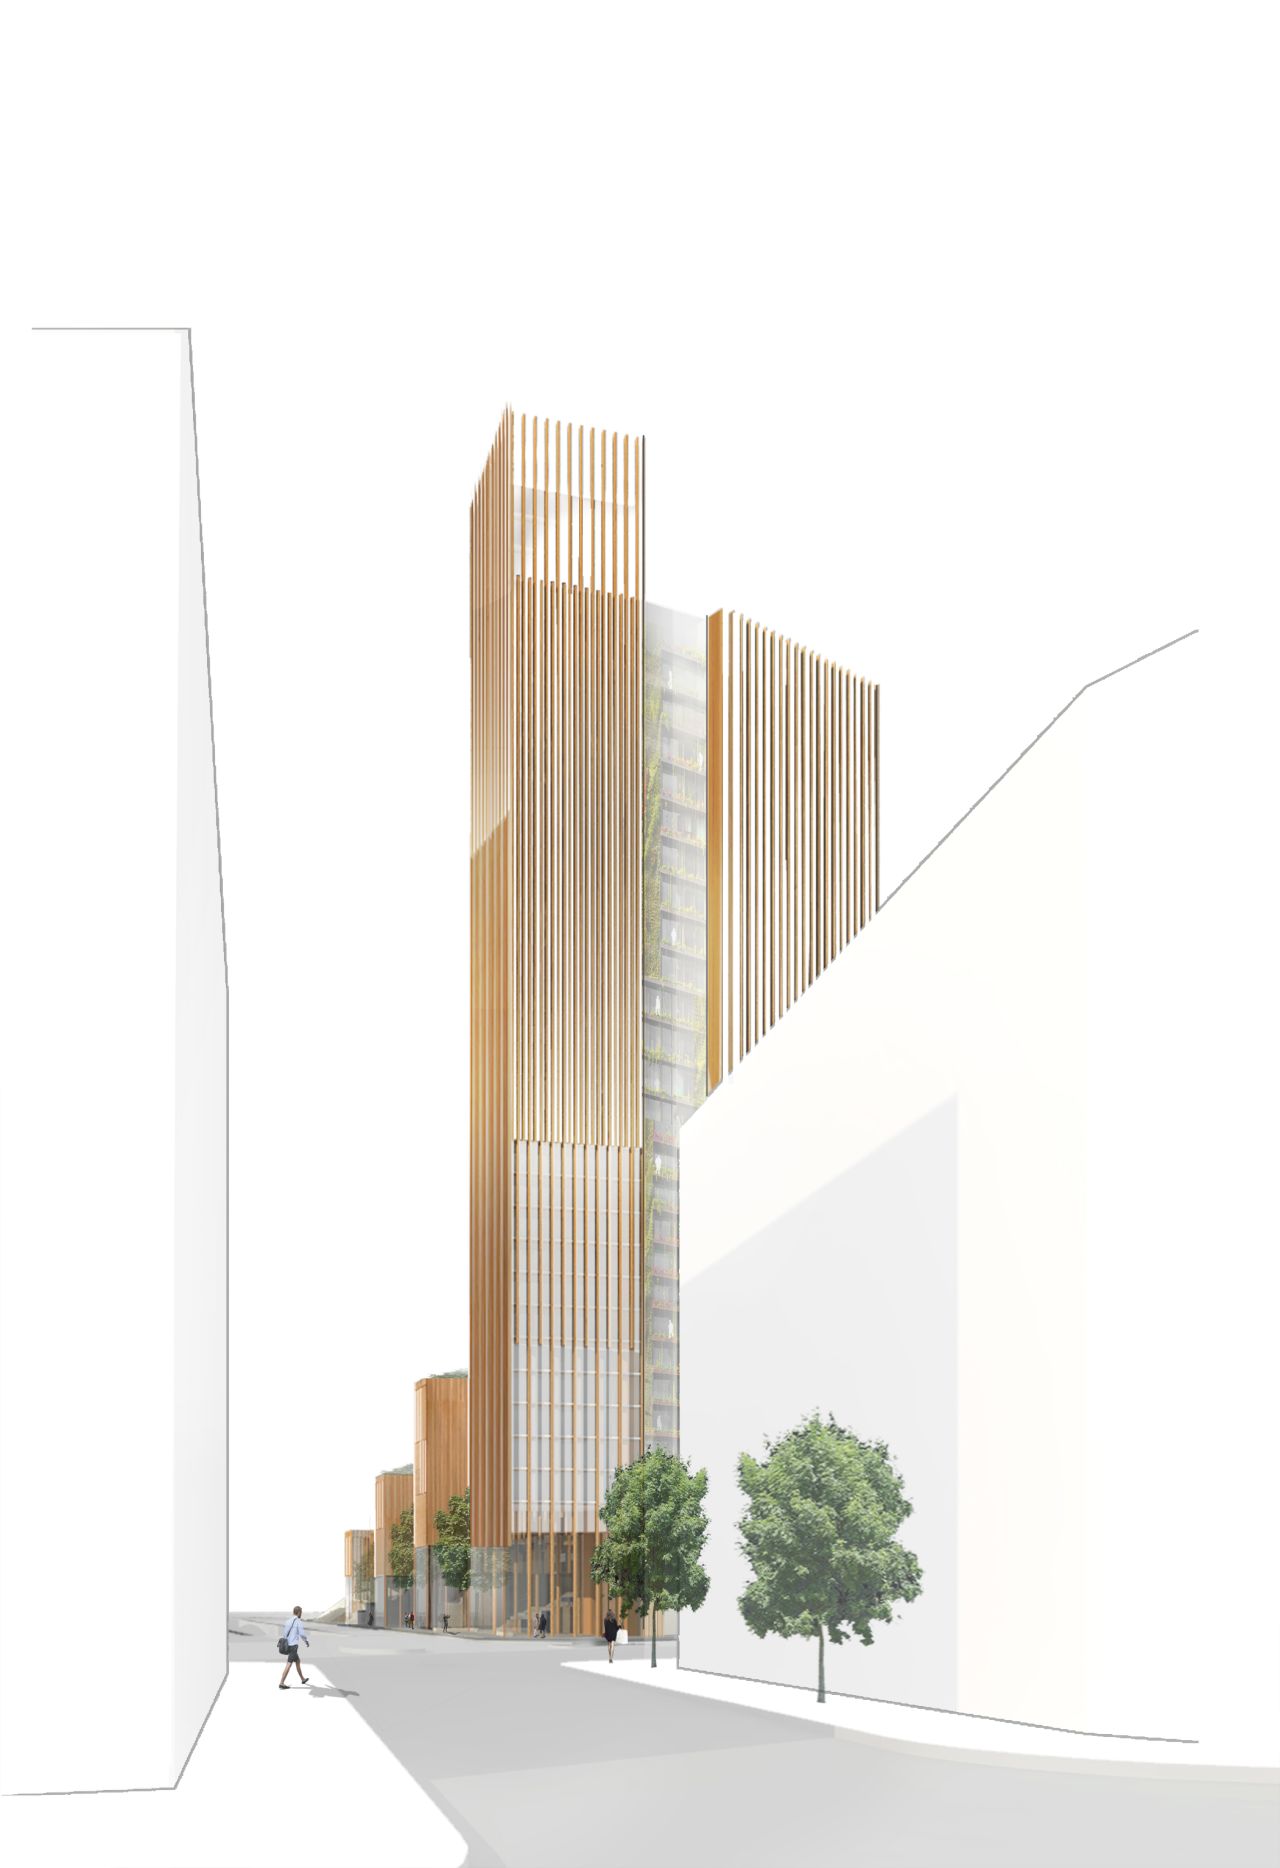 The firm states the building will be the world's tallest wood building if built.